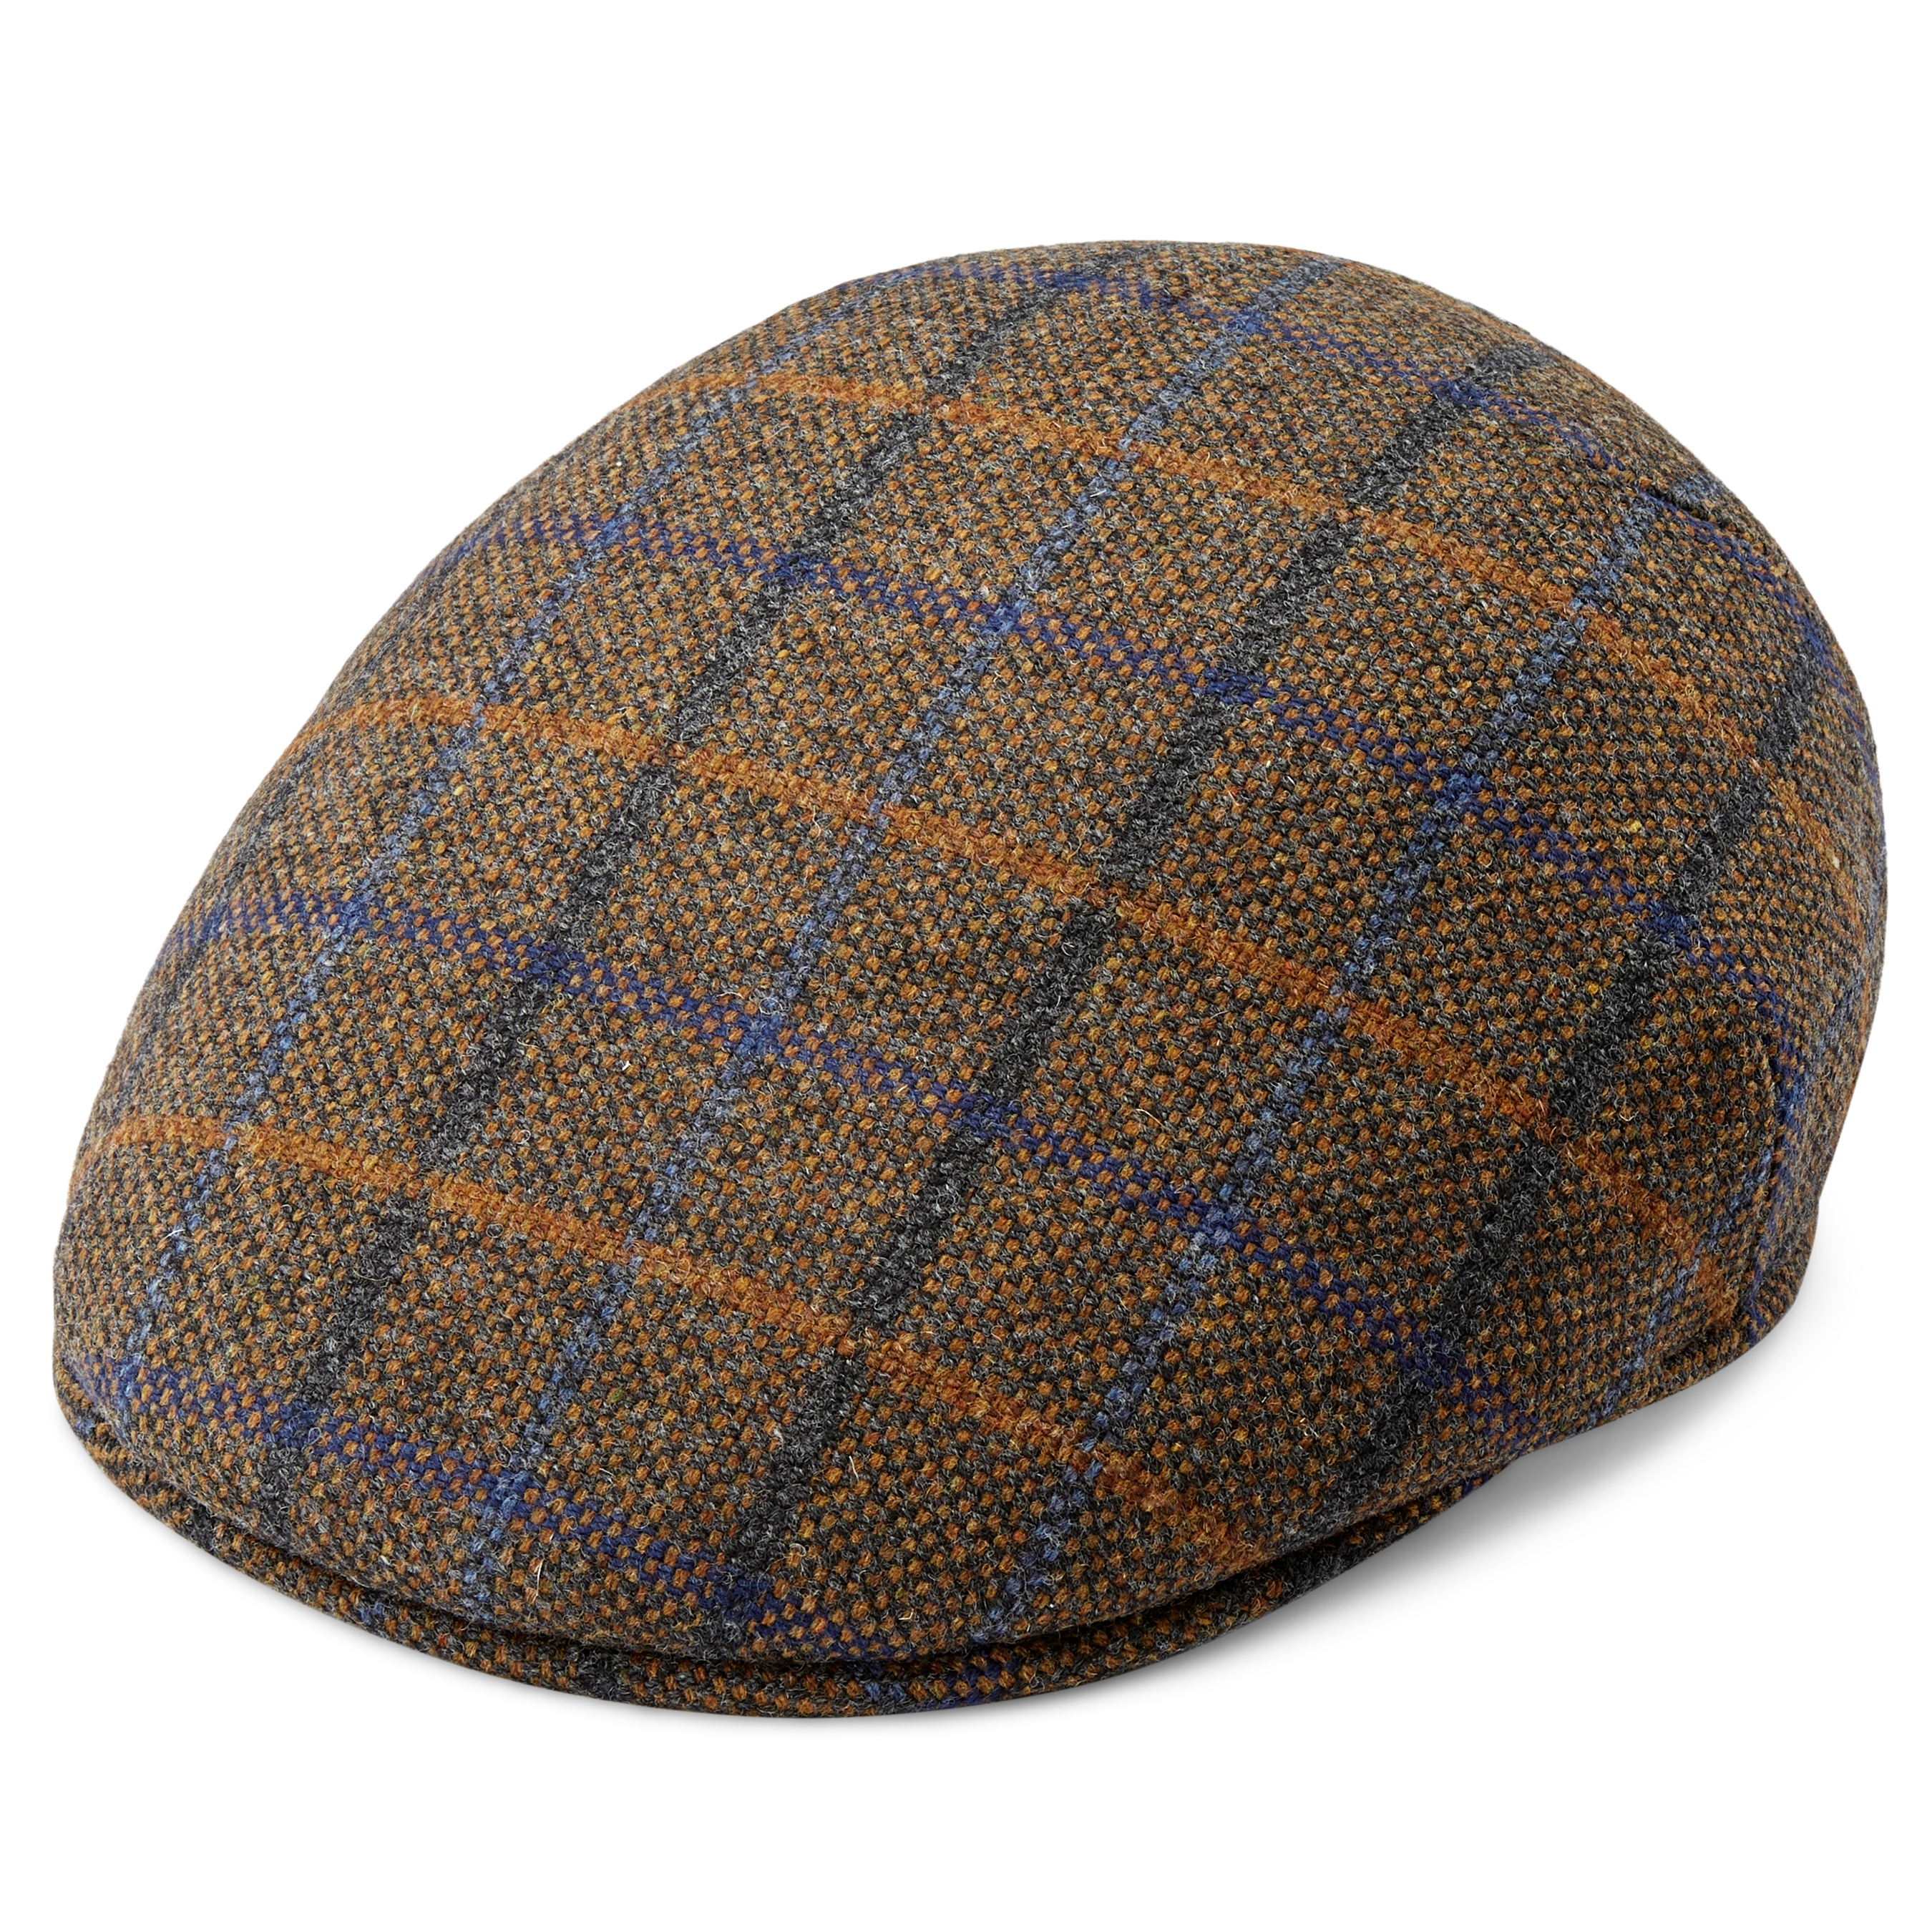 Weven Savant labyrint How to Wear A Flat Cap Without Looking Flat